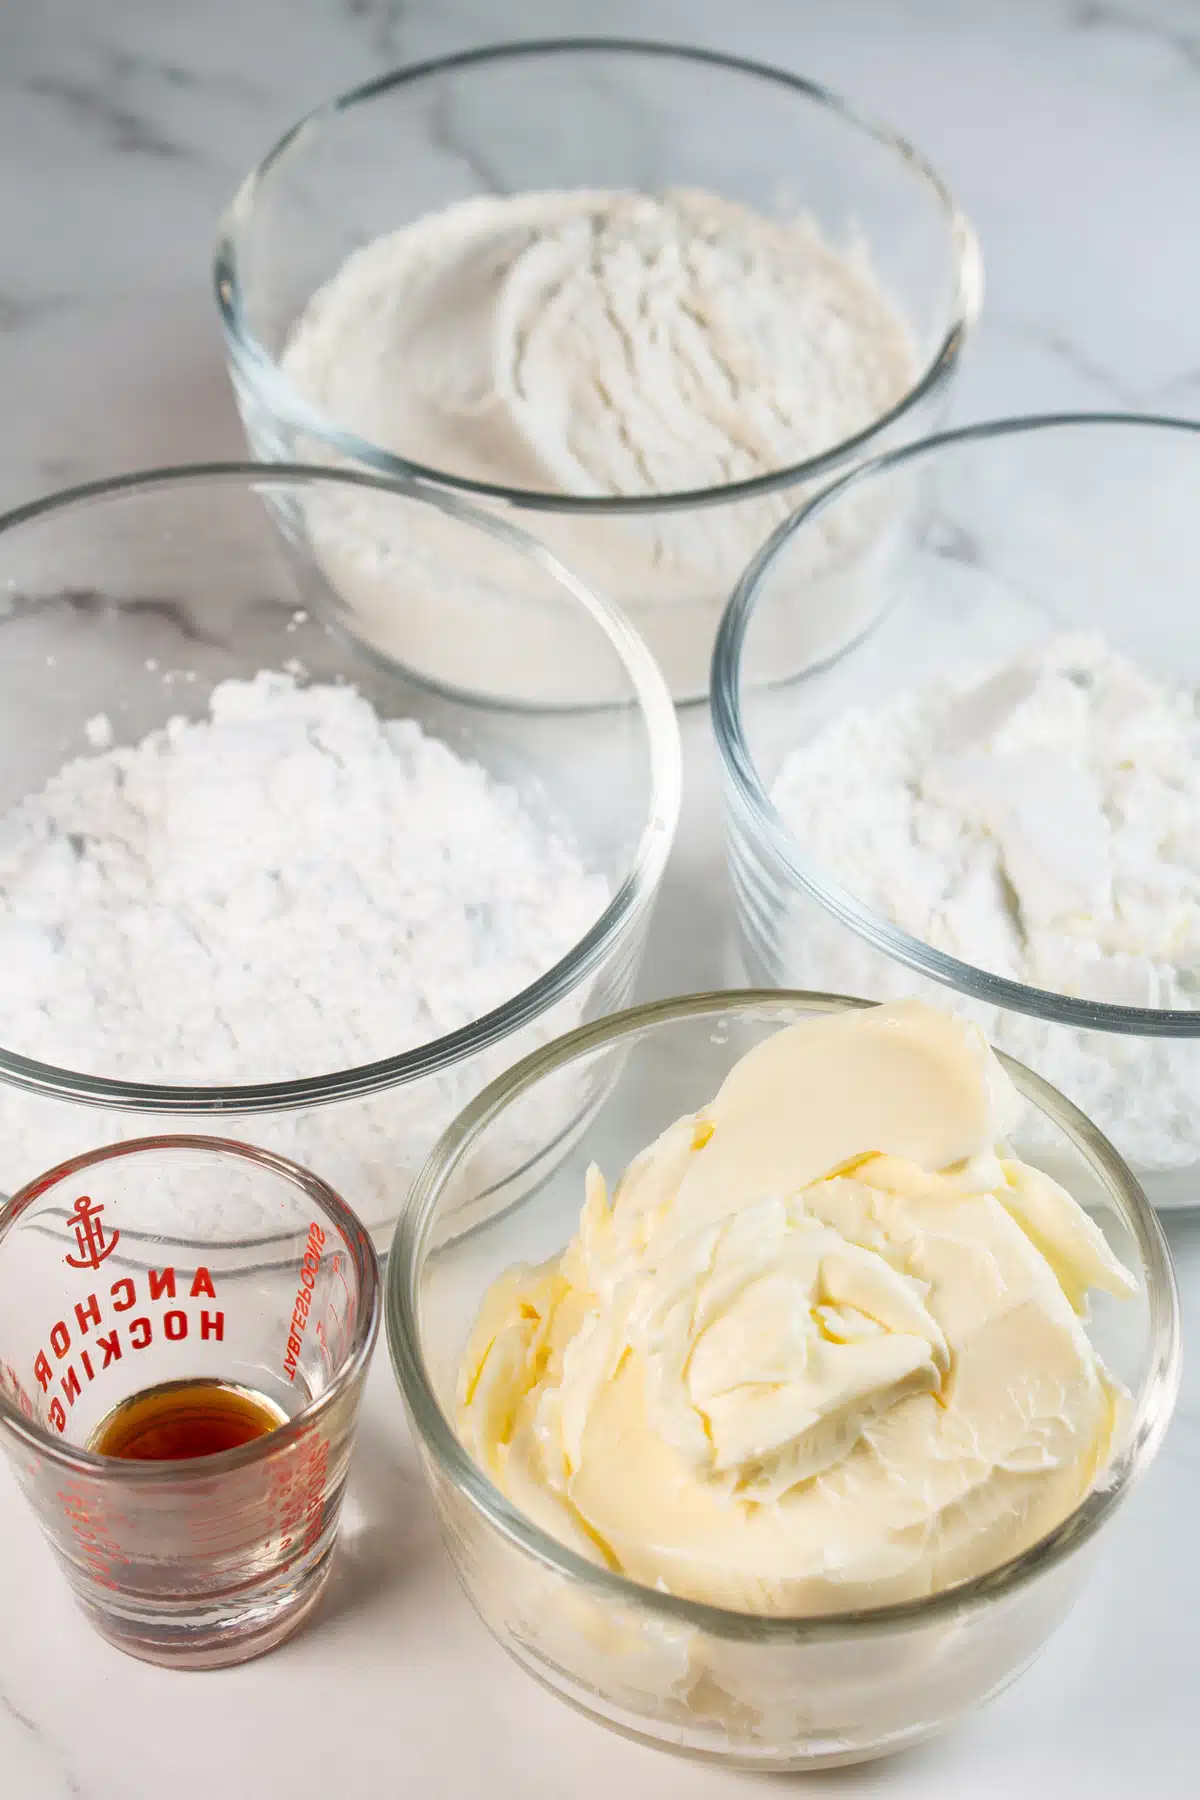 Tall image showing cornstarch cookie ingredients.